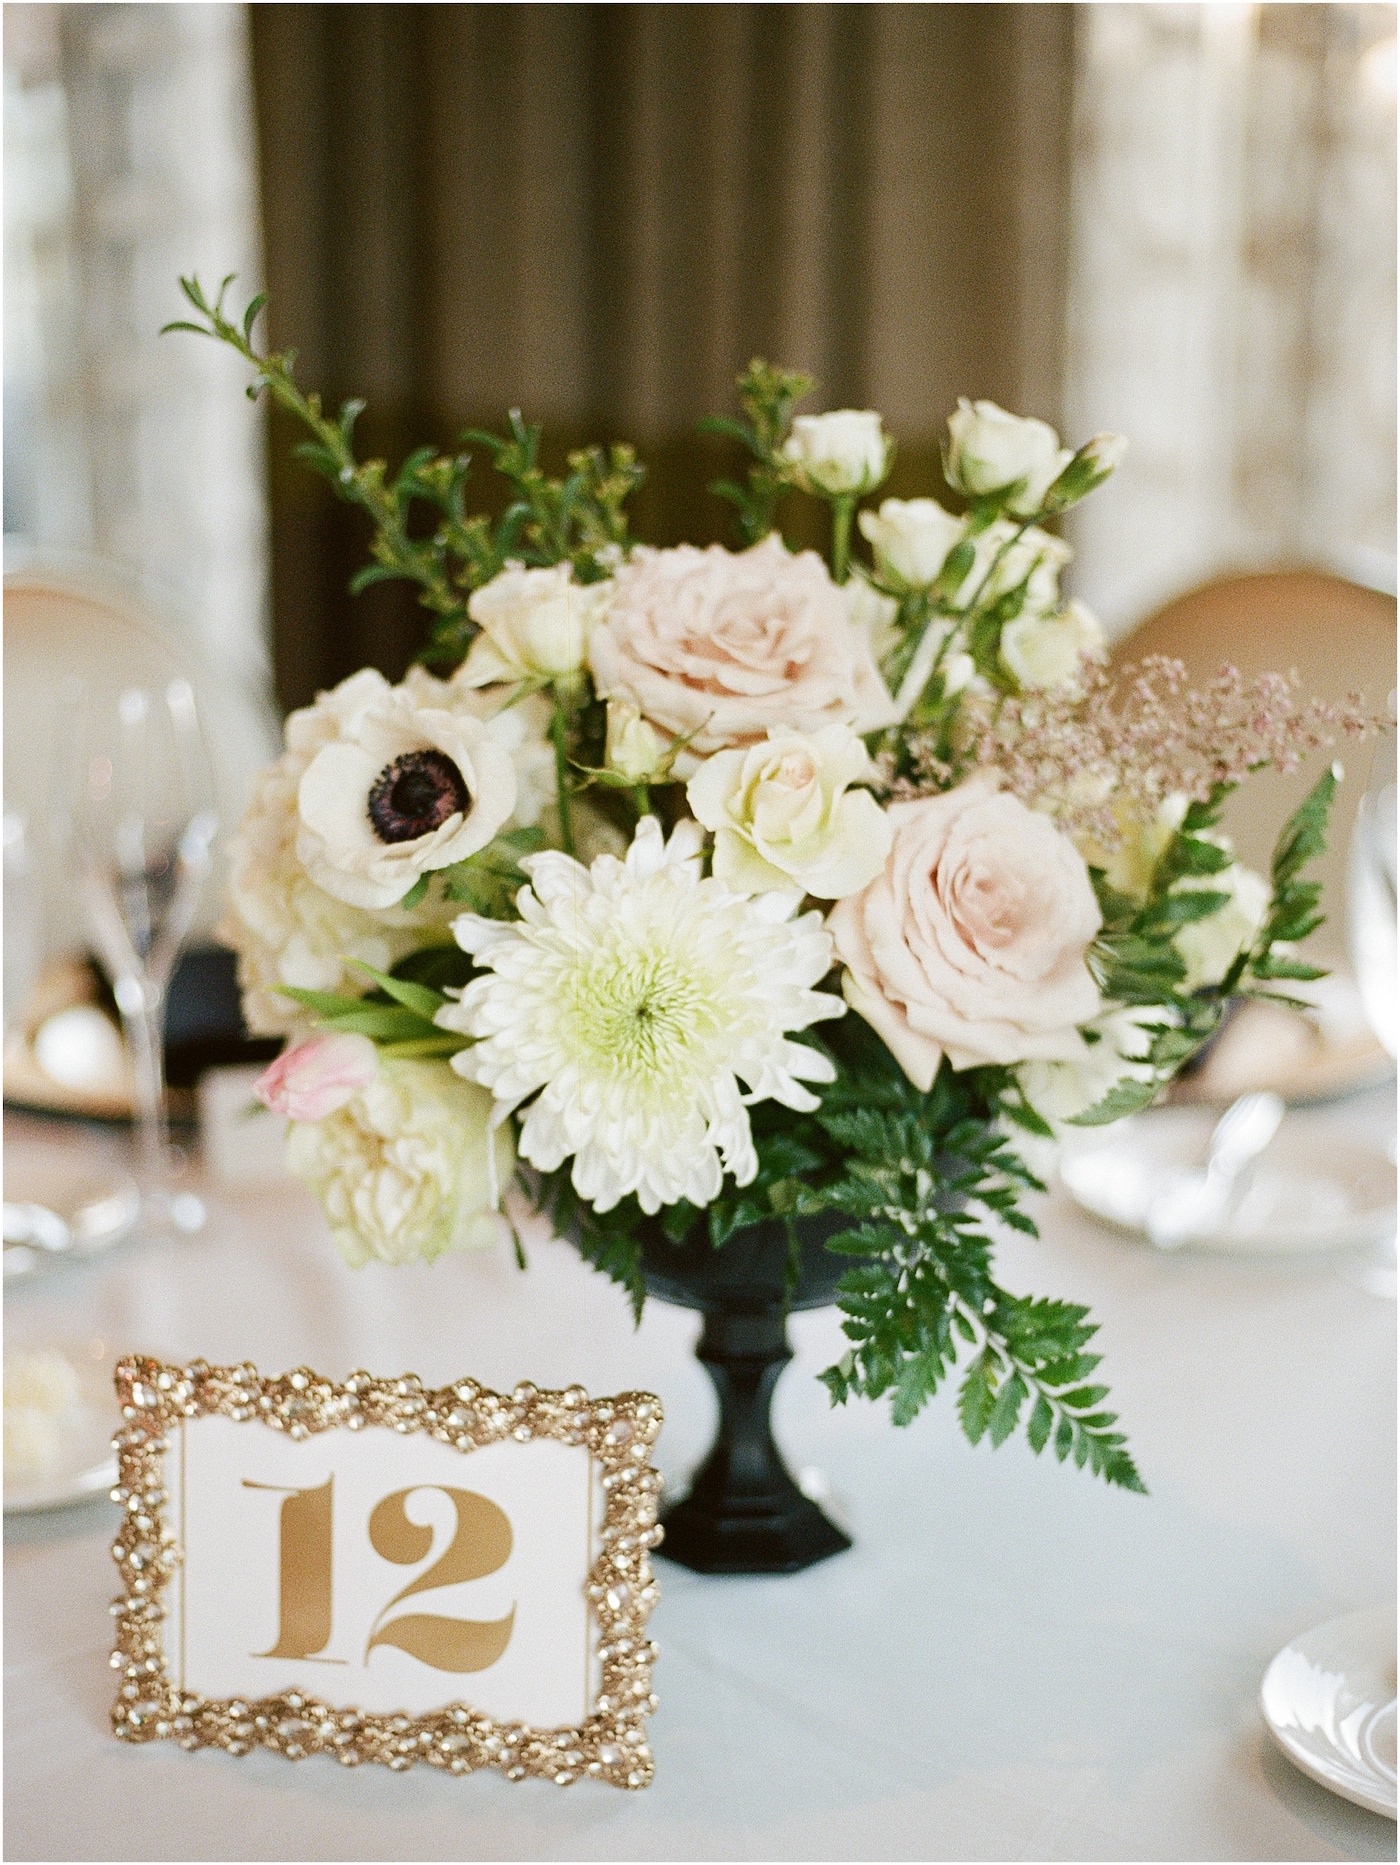 Black and White Wedding Centerpiece with Anemone Roses Chrysanthemums and Greenery | Gold Frame Table Number